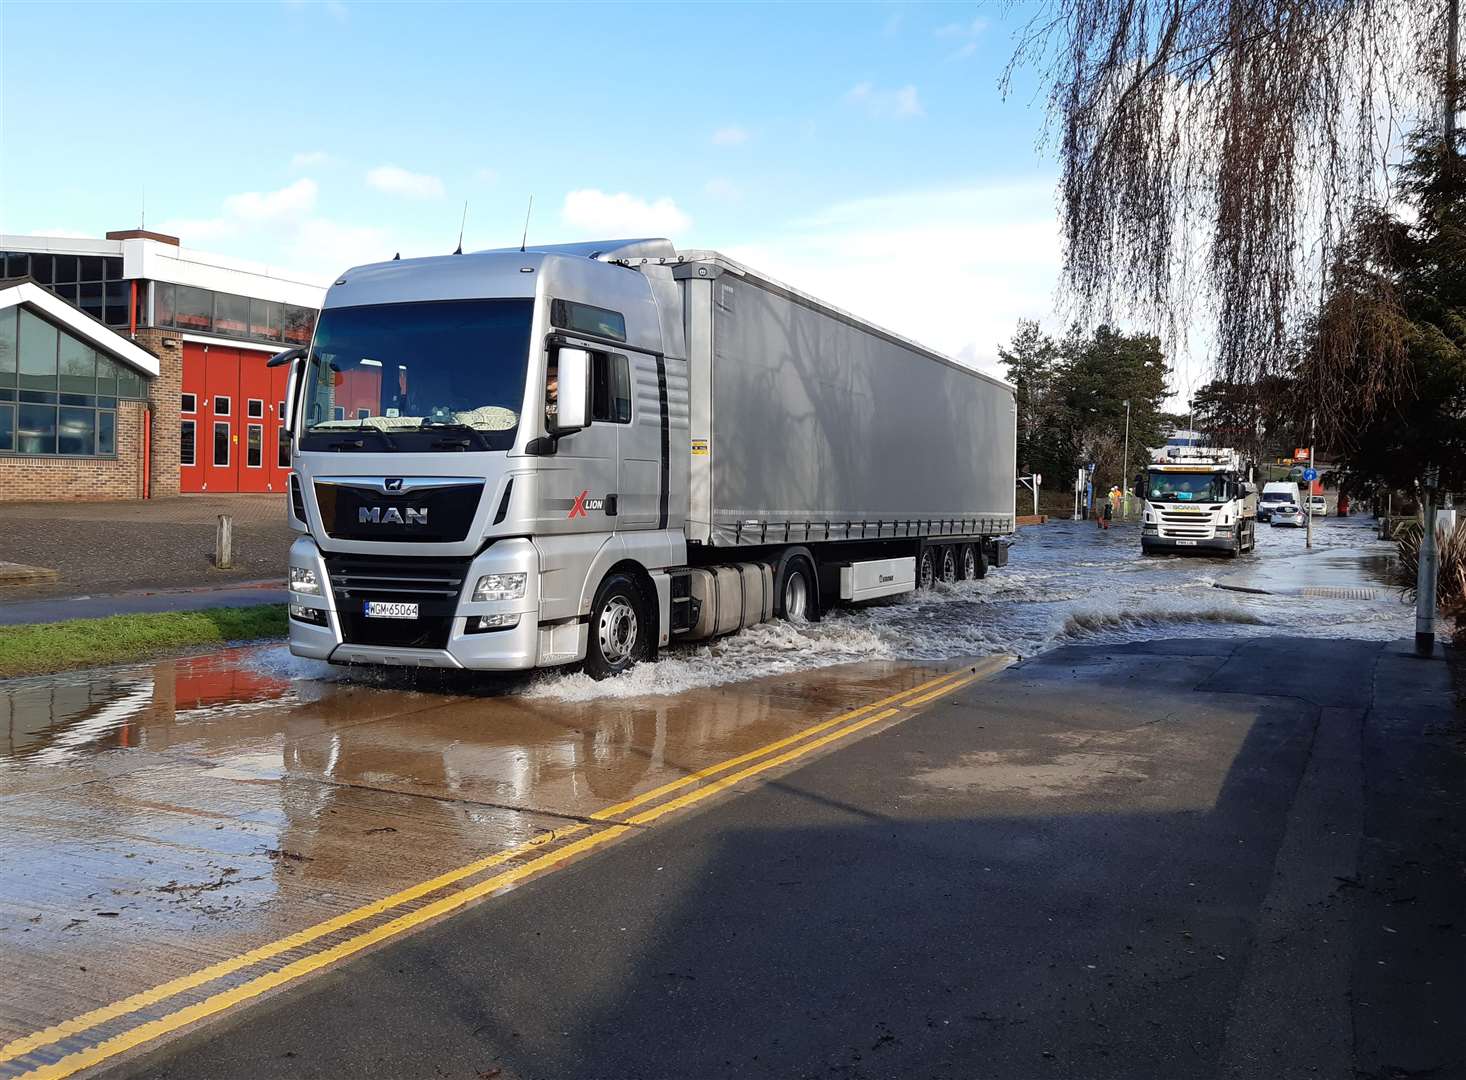 A lorry ploughed through the water, but the estate remains closed